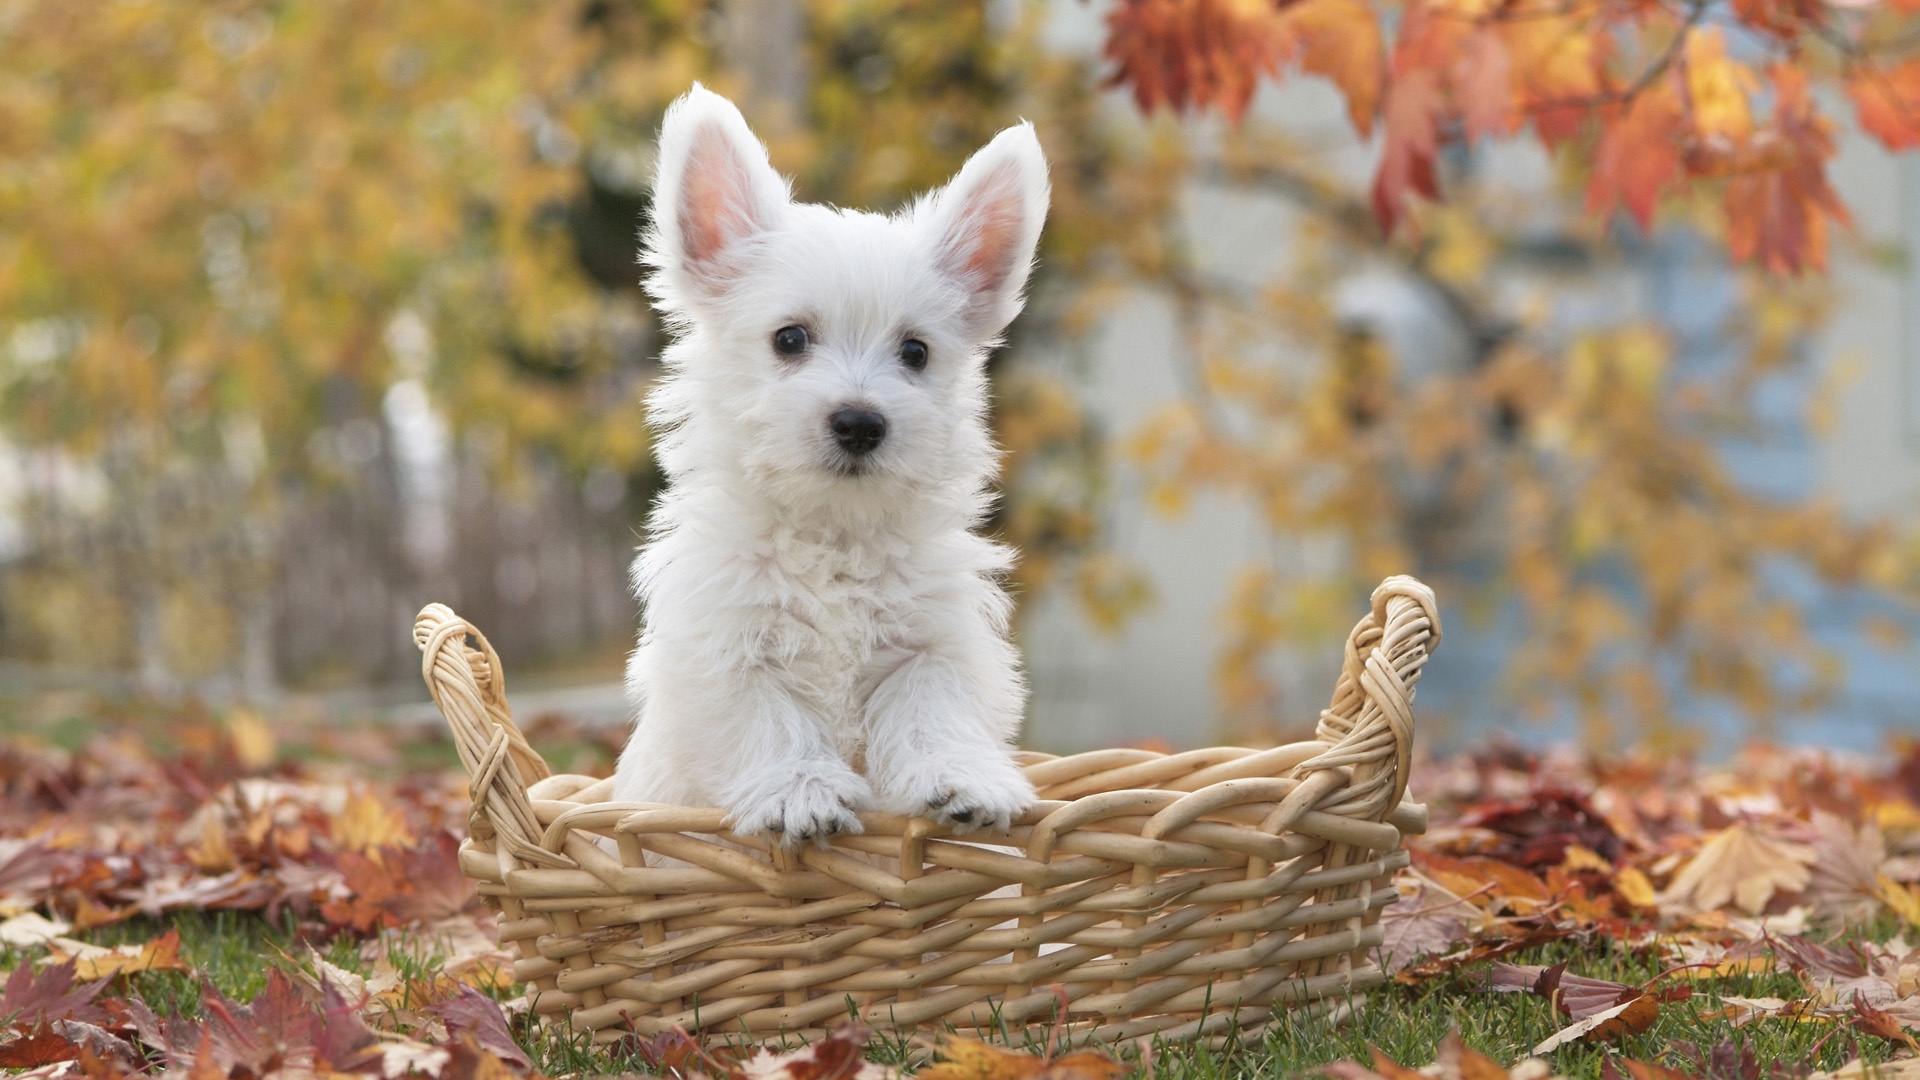 types of terriers small